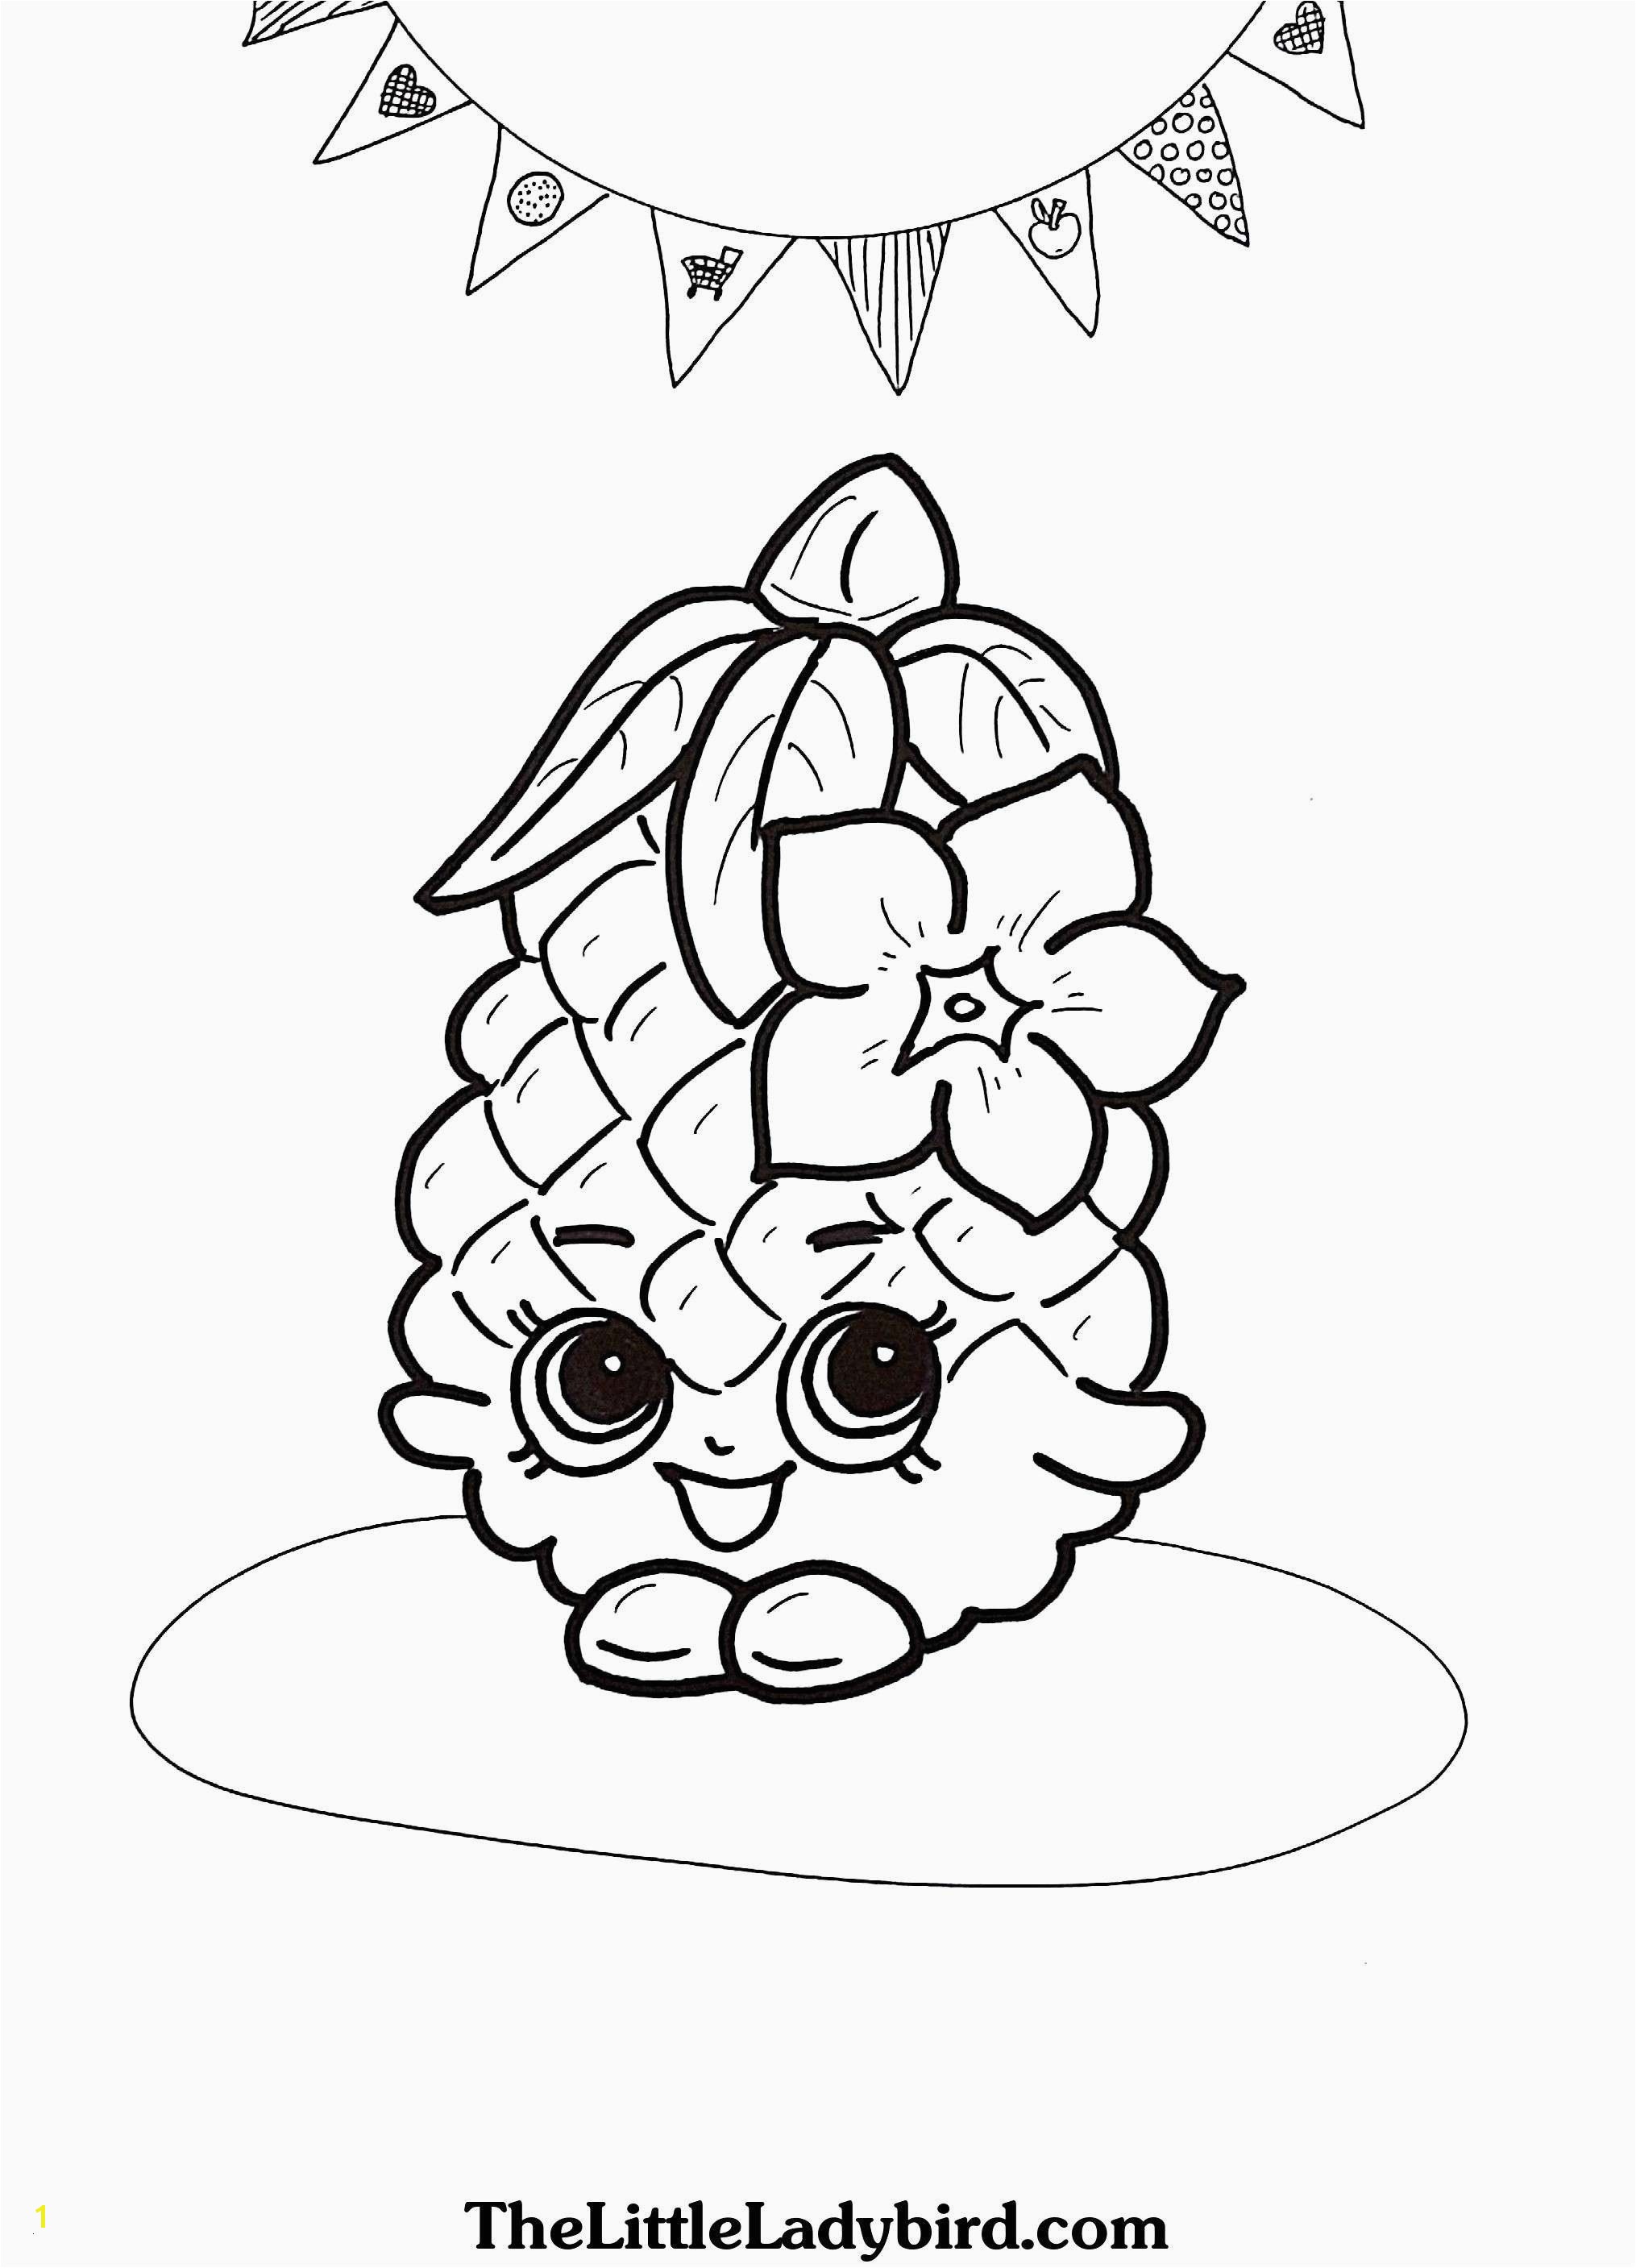 Valentine Coloring Pages to Print 30 New Printable Valentines Coloring Pages Alabamashrimpfestival